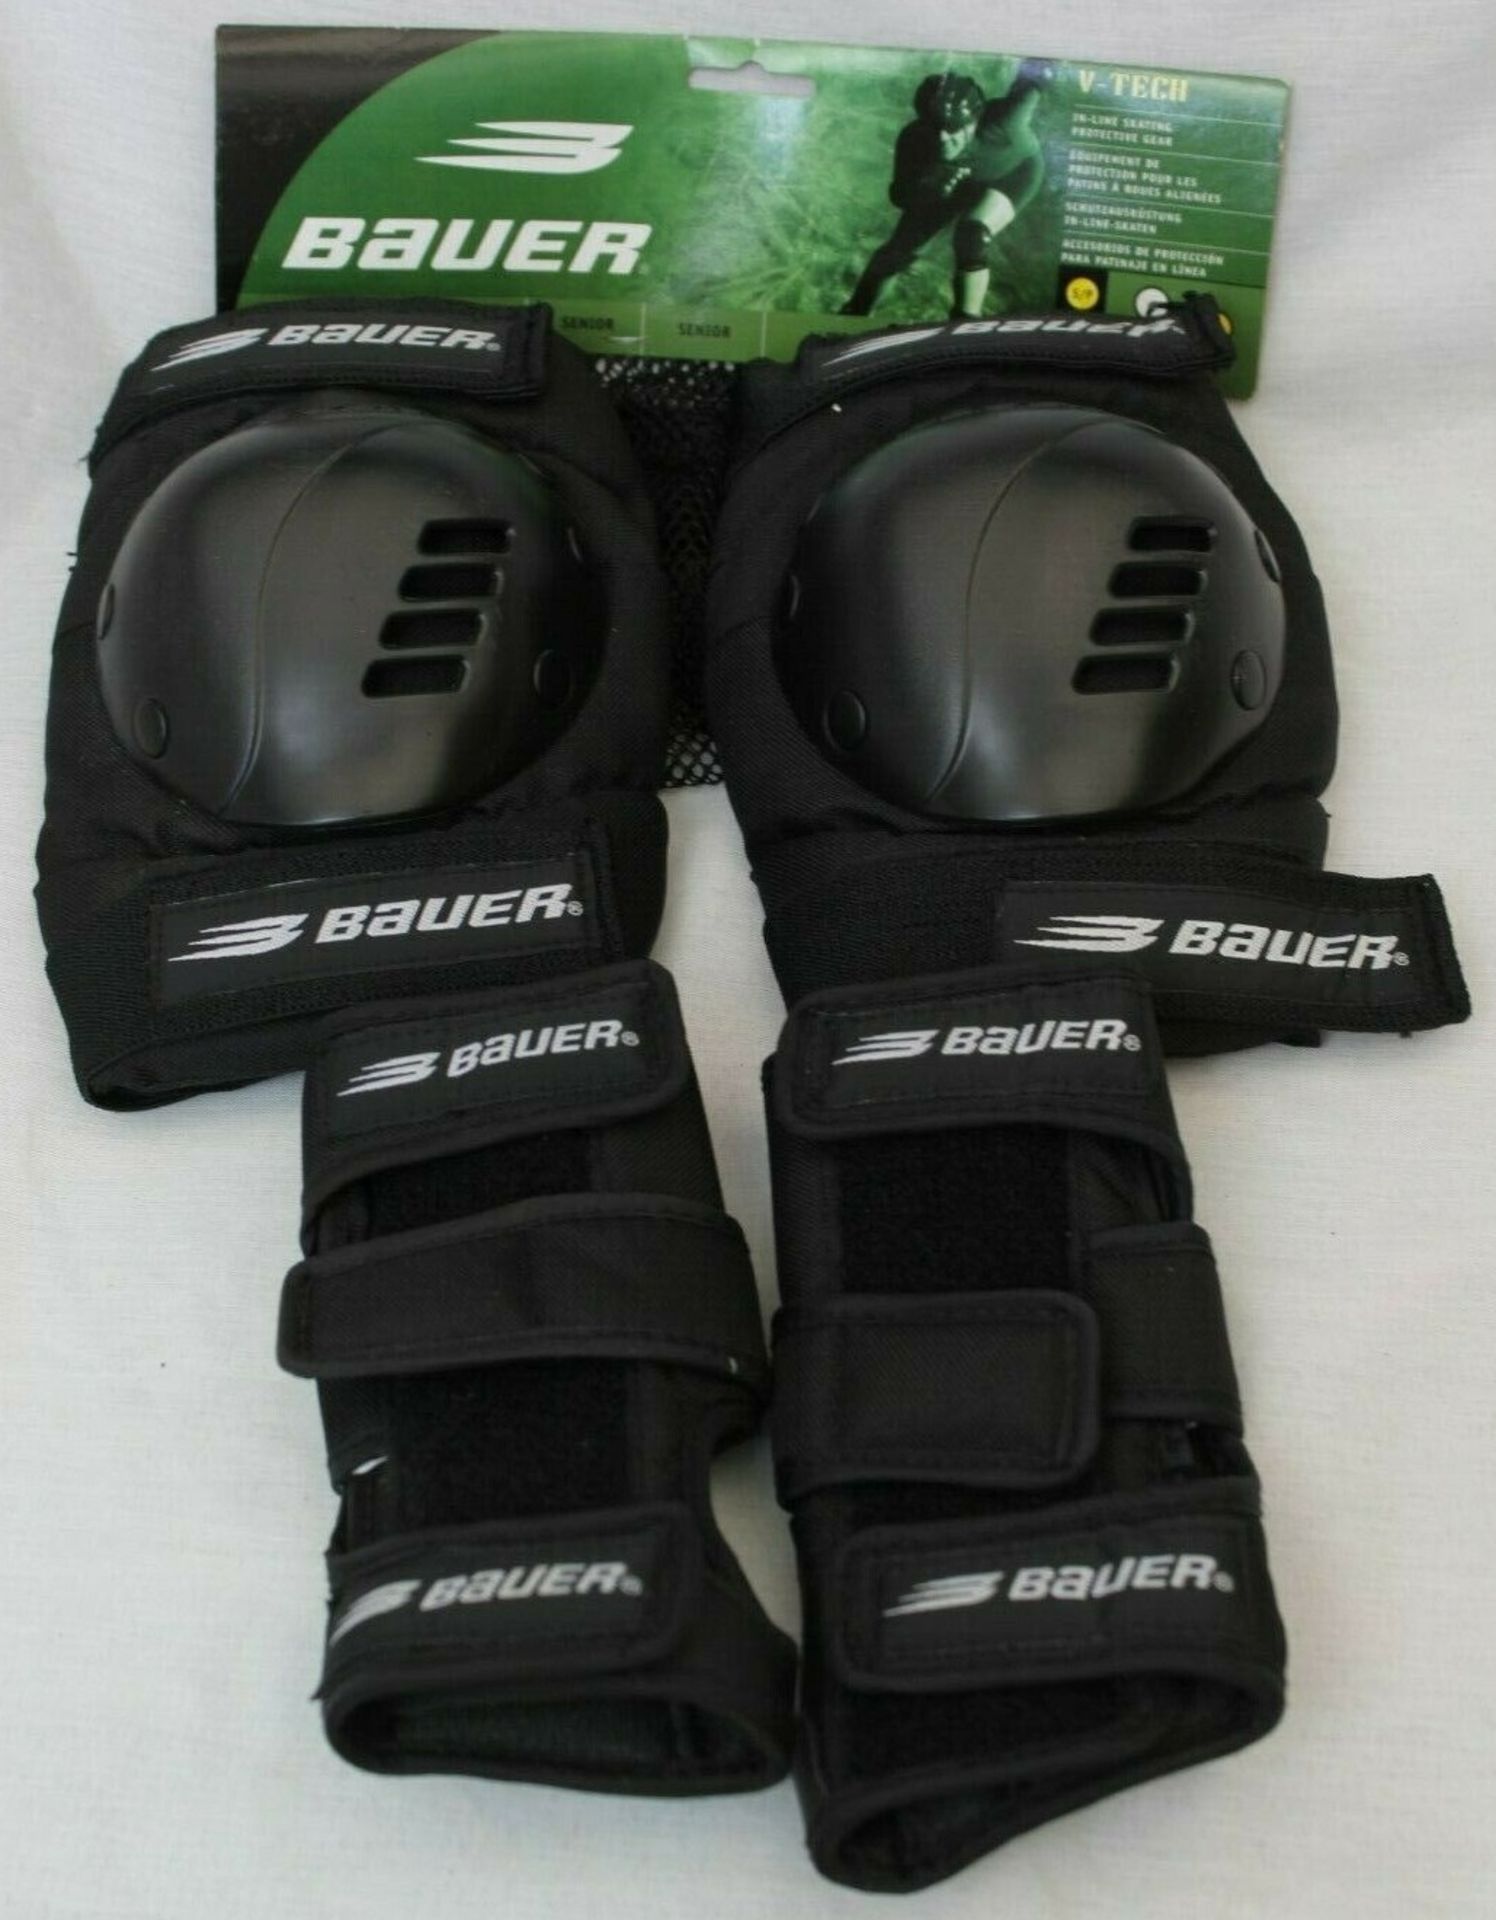 50 x Sets of Brand New Bauer Safety Pads | Assorted Adult and Kids Sizes/Types - Image 4 of 4